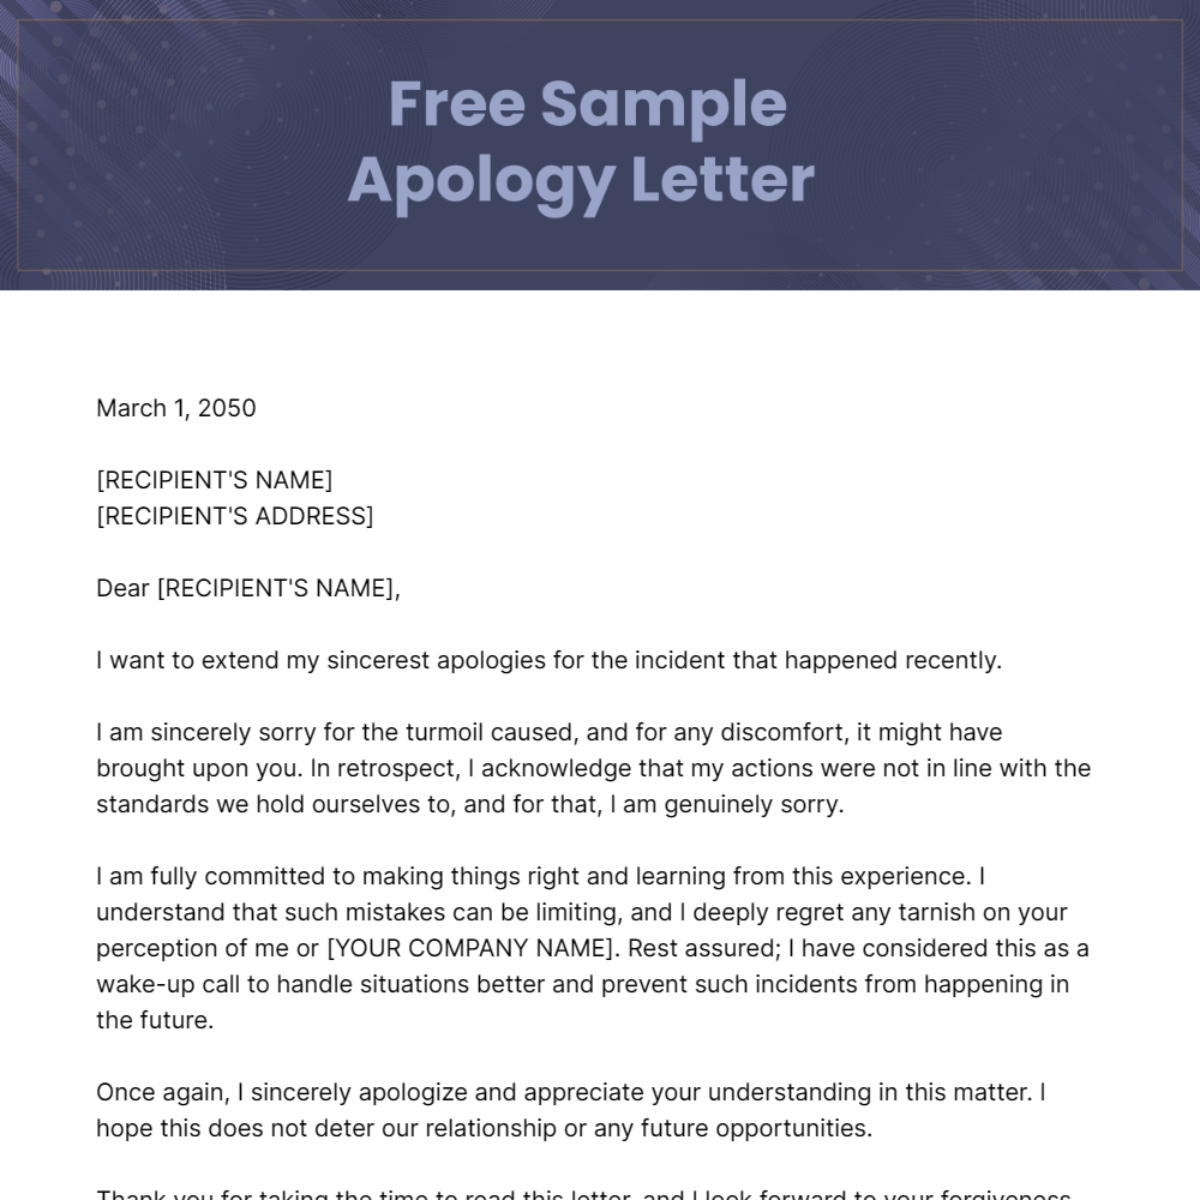 Sample Apology Letter Template